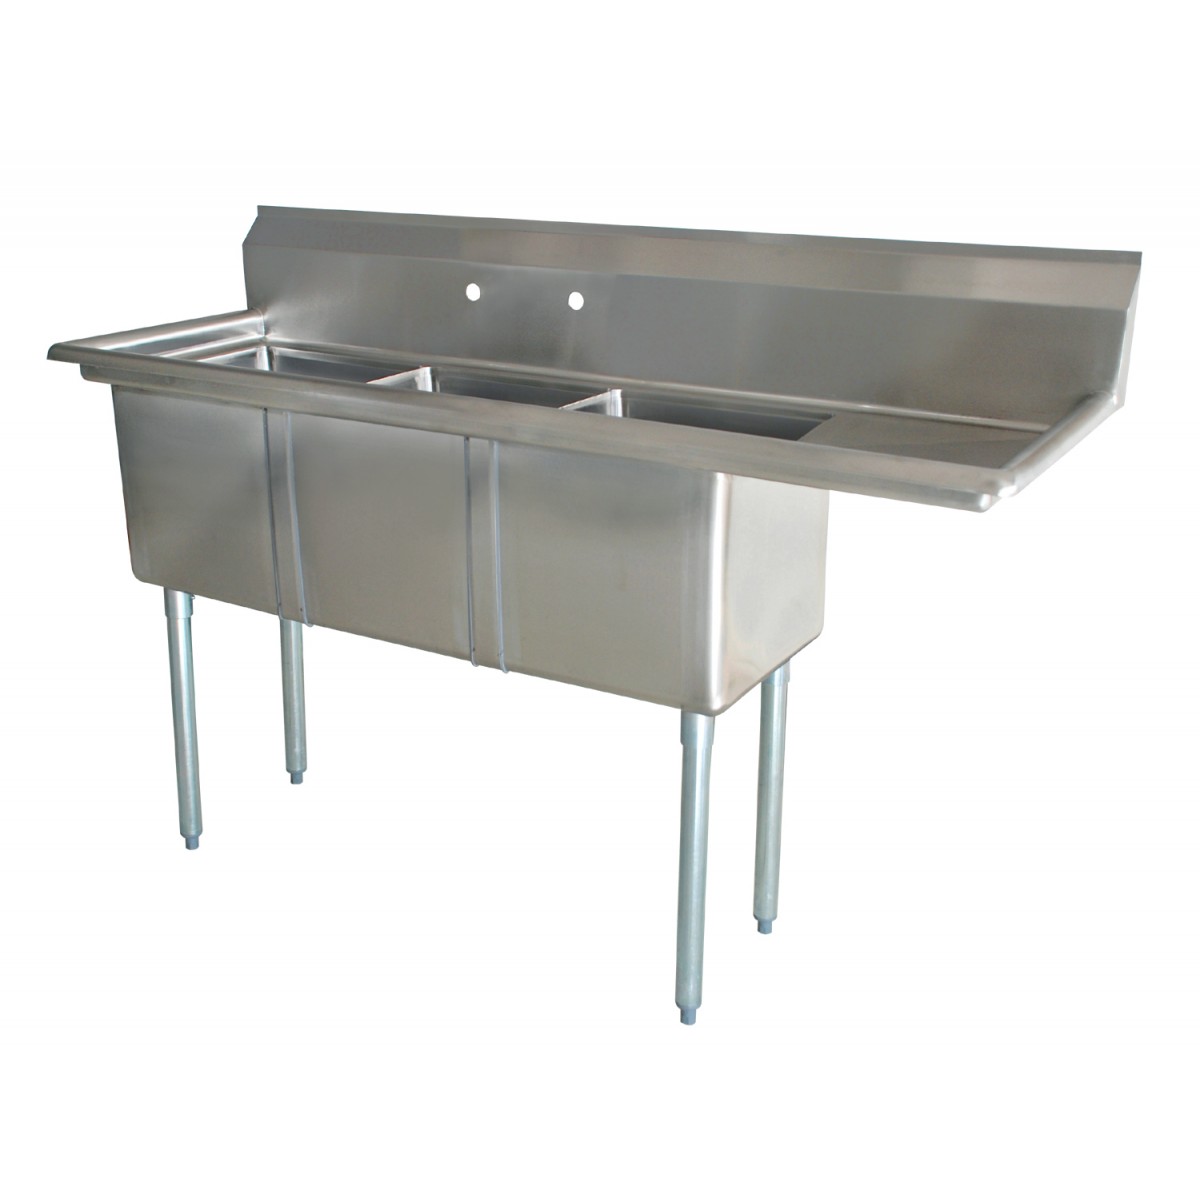  Sink  Three Compartment Right Drainboard Prep Sinks  